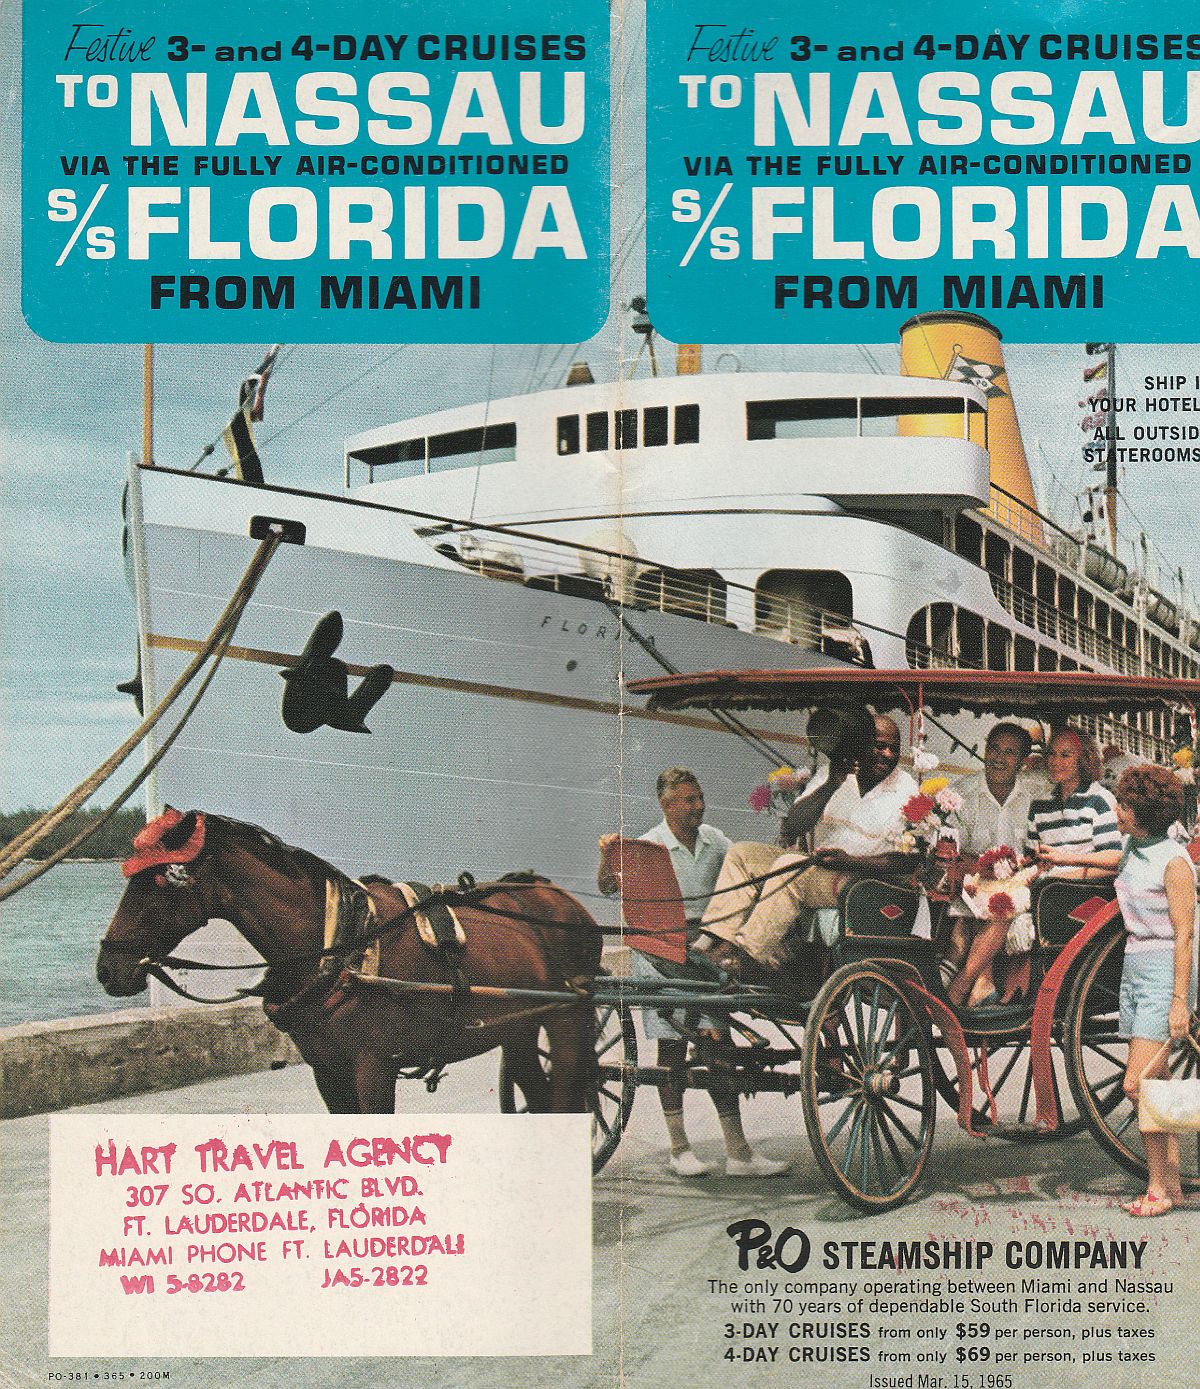 ss Florida issued Mar. 15, 1965: Festive 3- and 4-day cruises to Nassau via the fully air-conditioned ss Florida